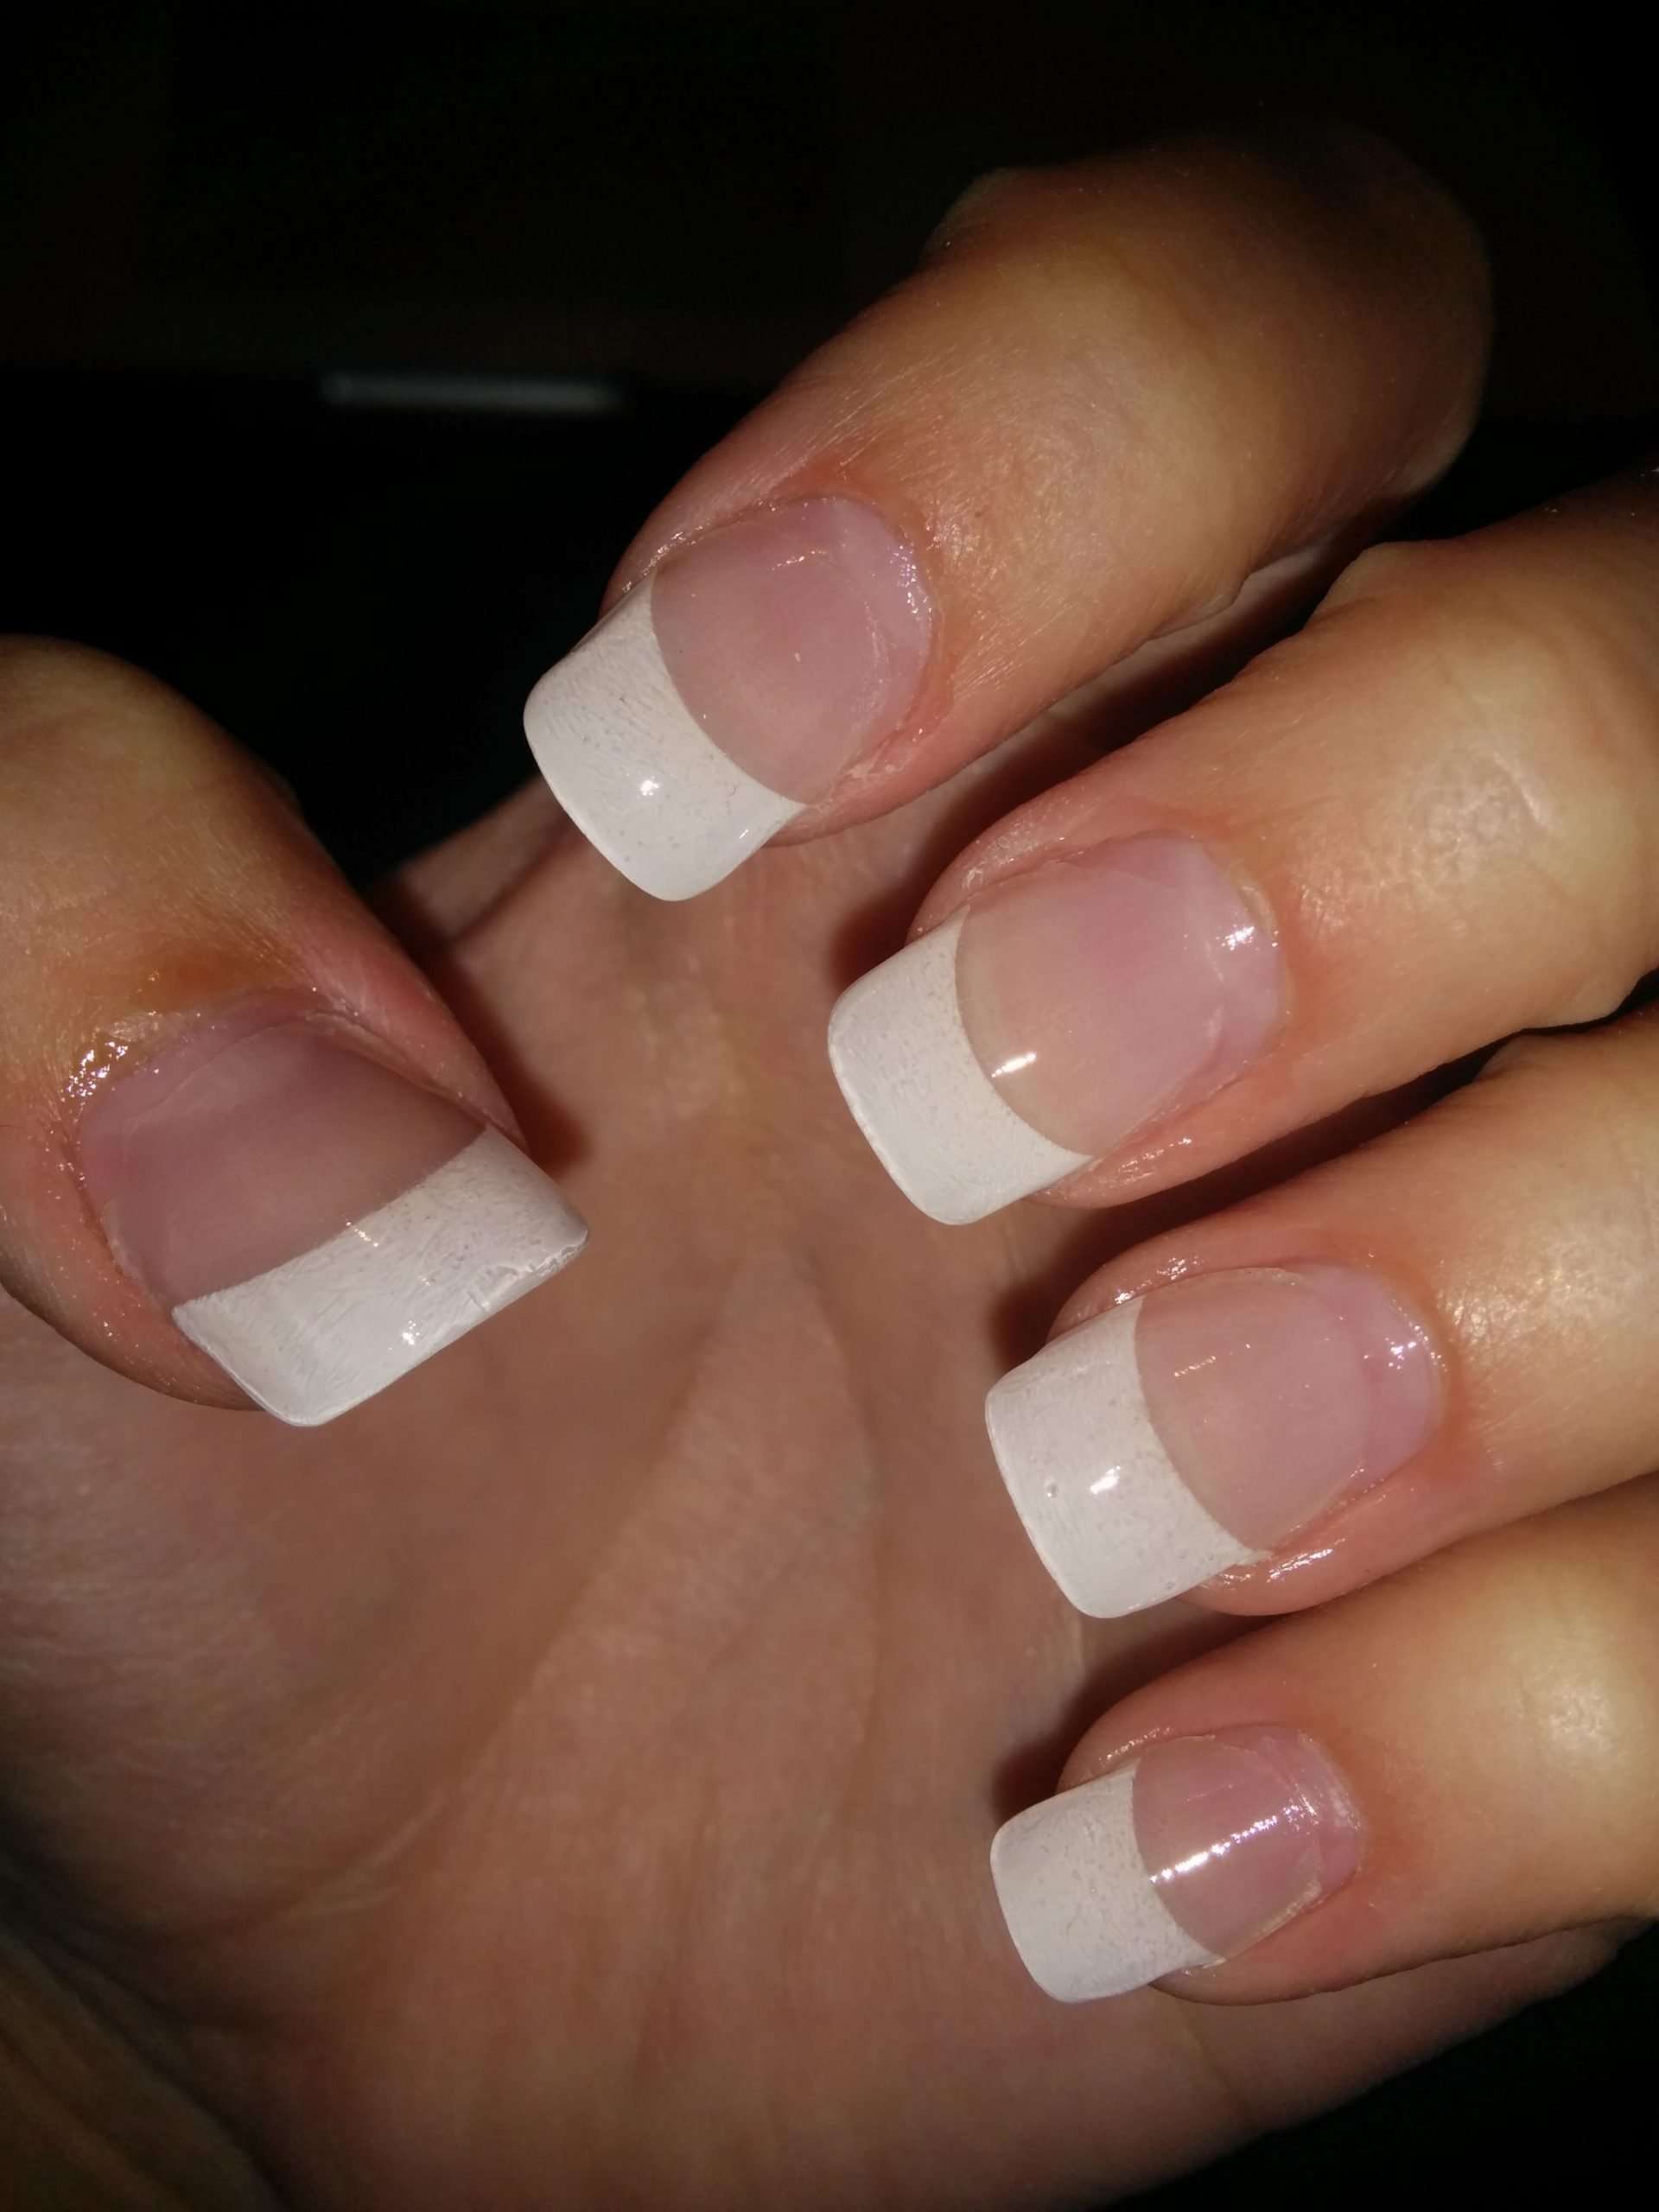 6 Easy Steps To Make Your Acrylic Nails Last Longer ...